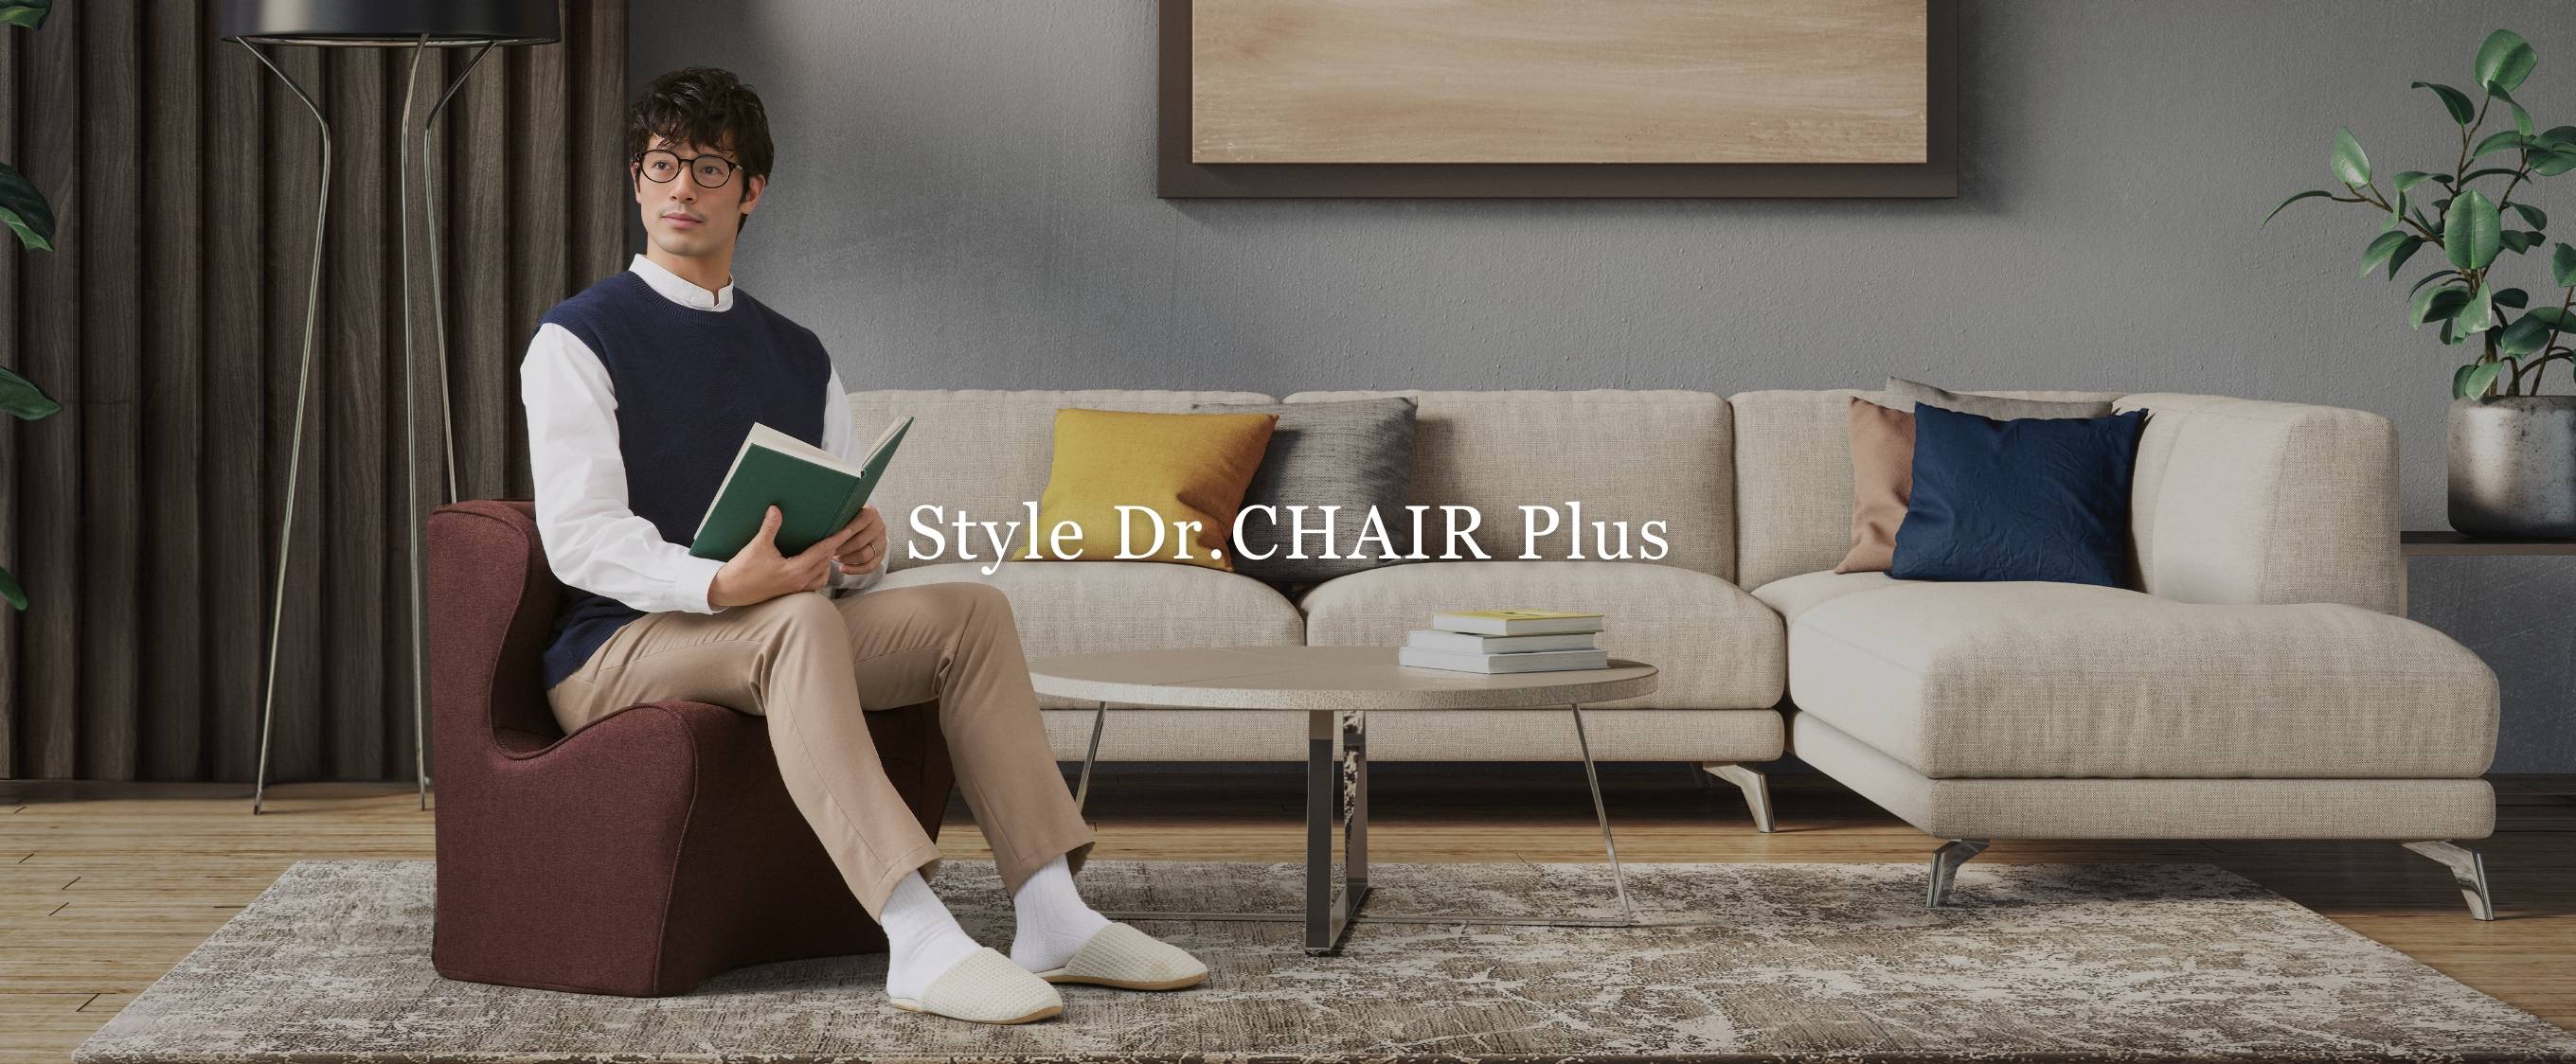 Style Dr.CHAIR Plus（スタイルドクターチェアプラス） | Style 